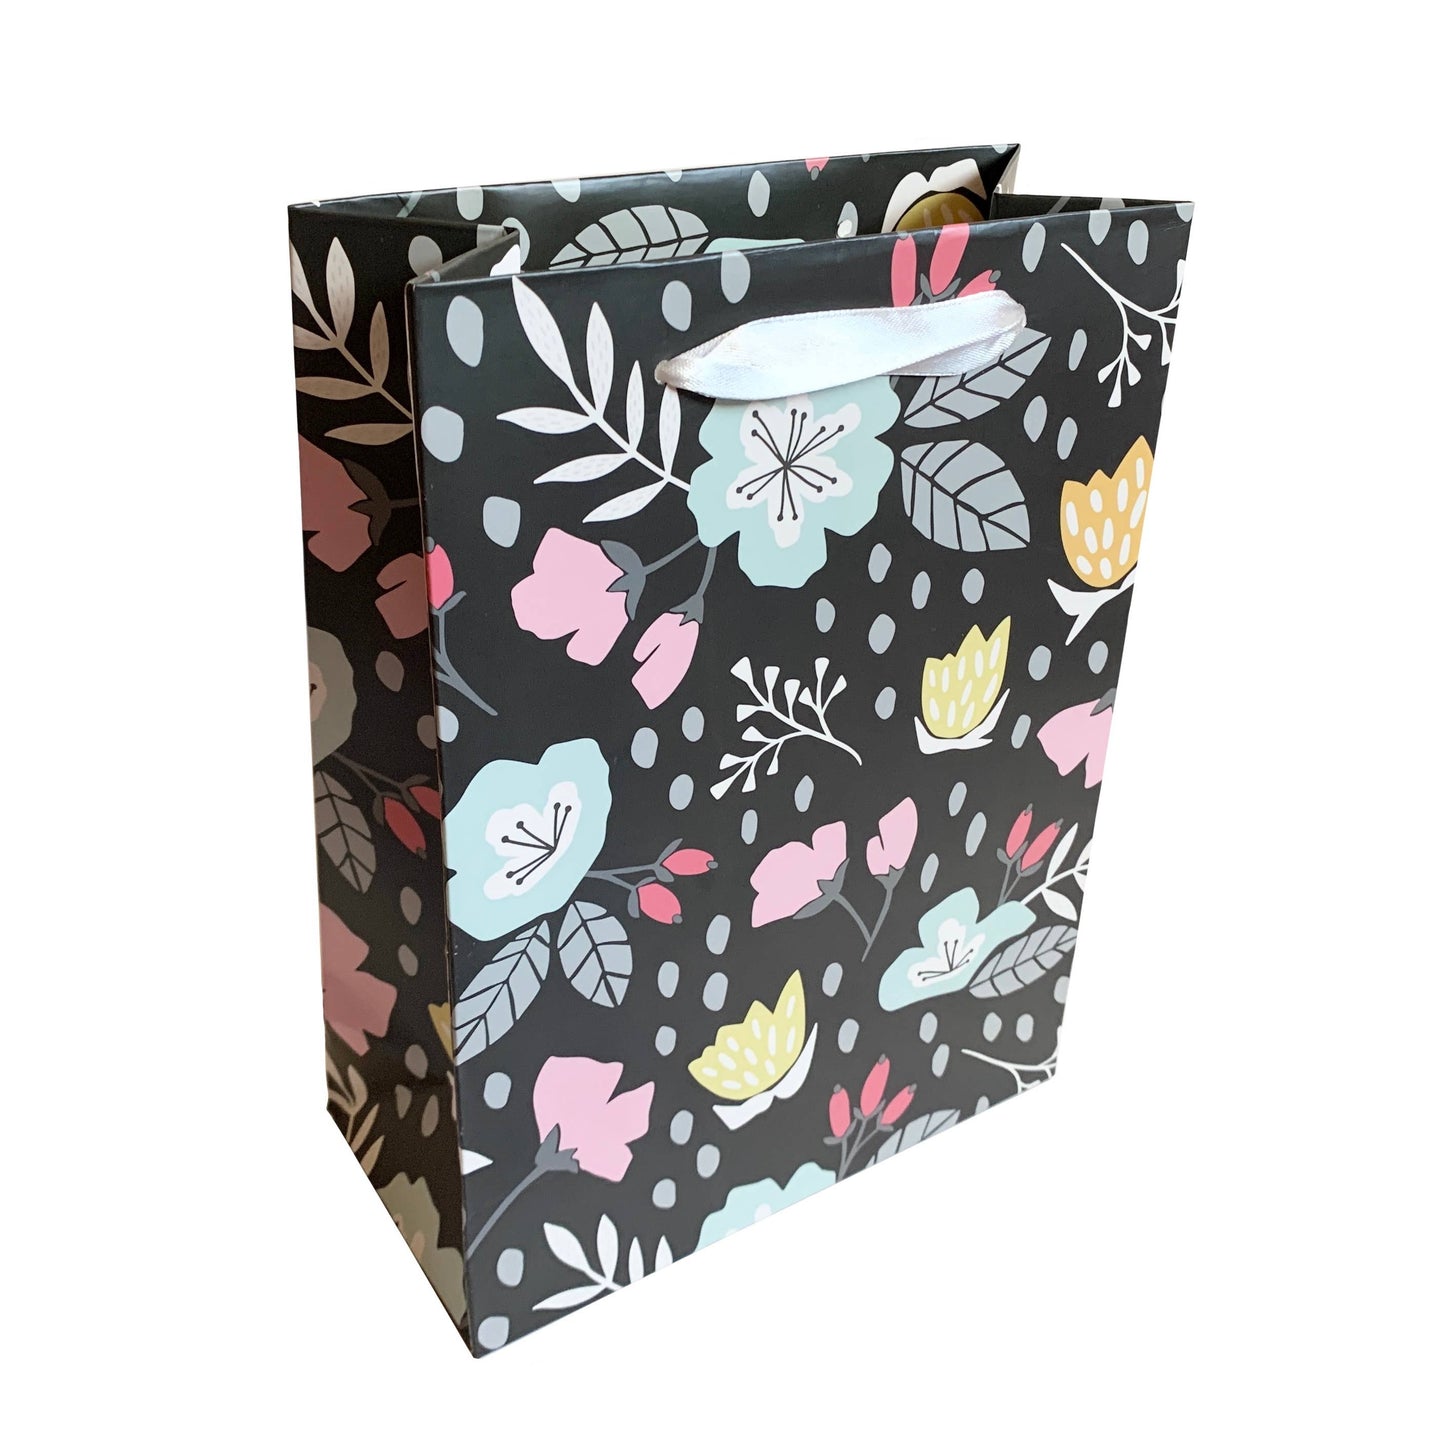 Small Black Floral Gift Bag (7" x 9.5" x 3.4")